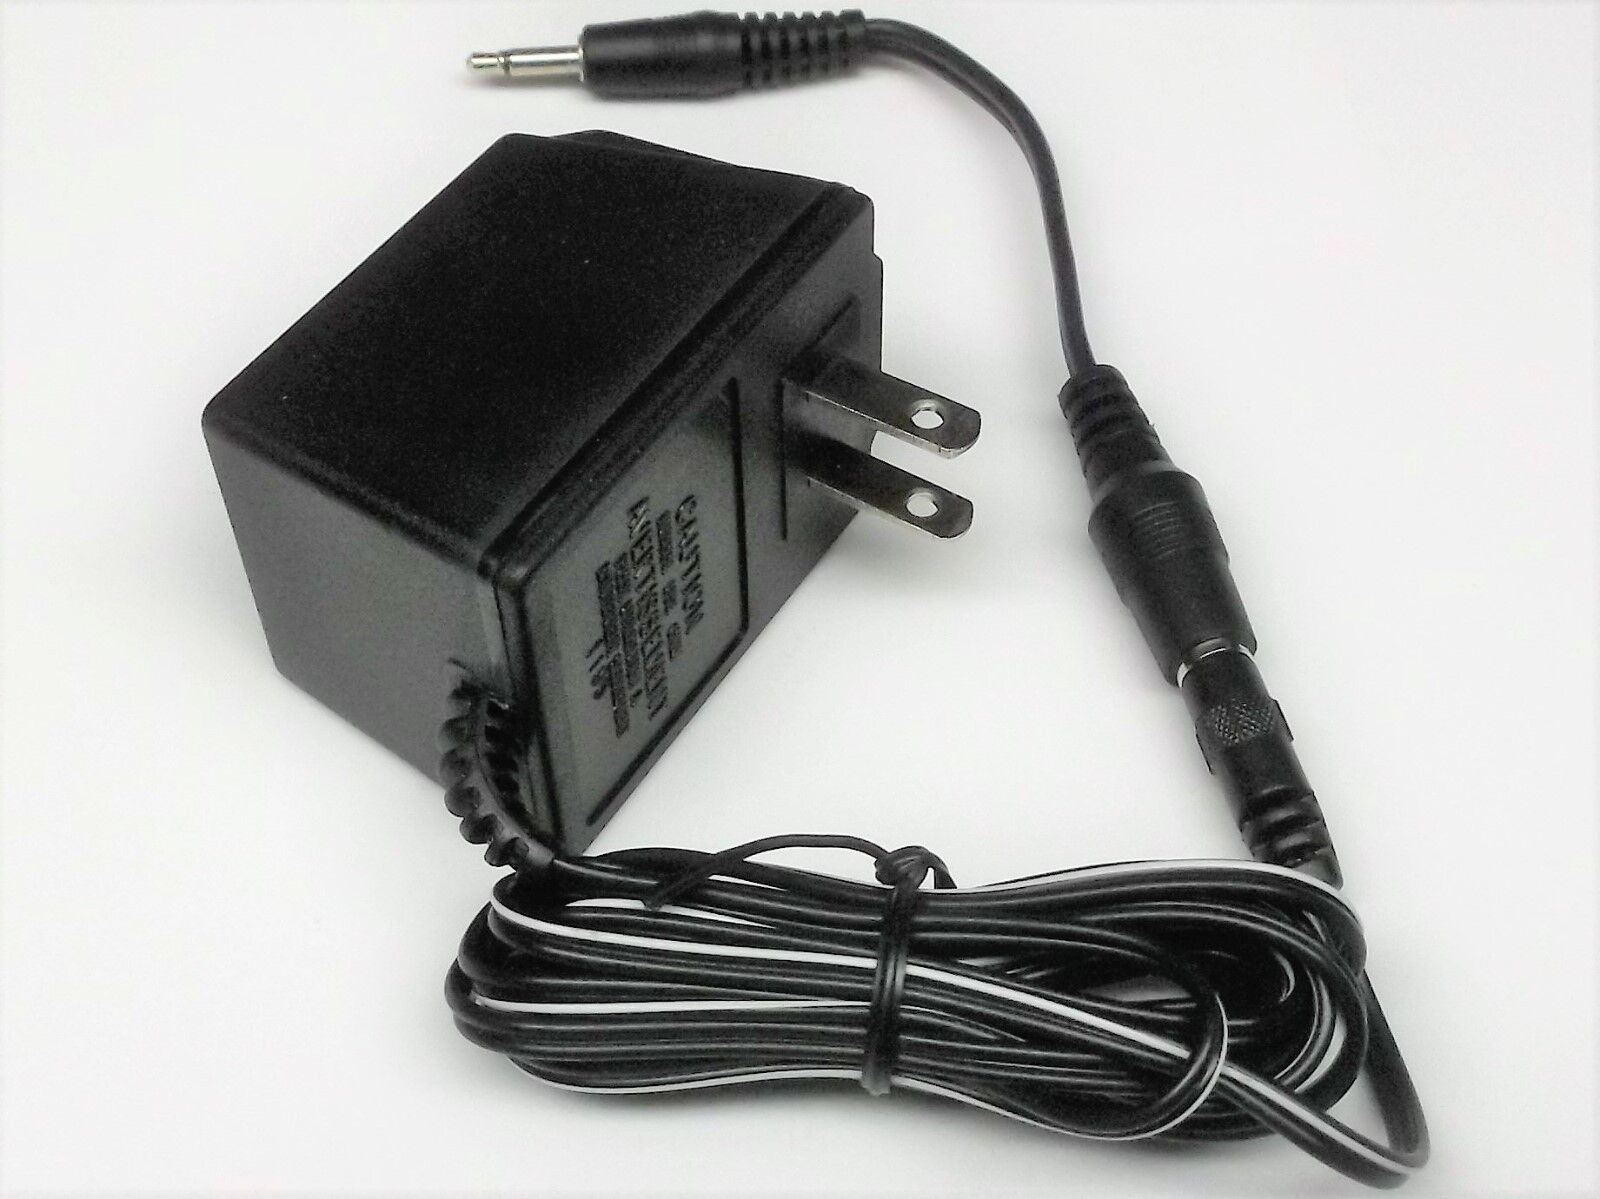 *Brand NEW*MEGO 2XL Talking Robot 8 Track Tape Cord AC Adapter Power Supply